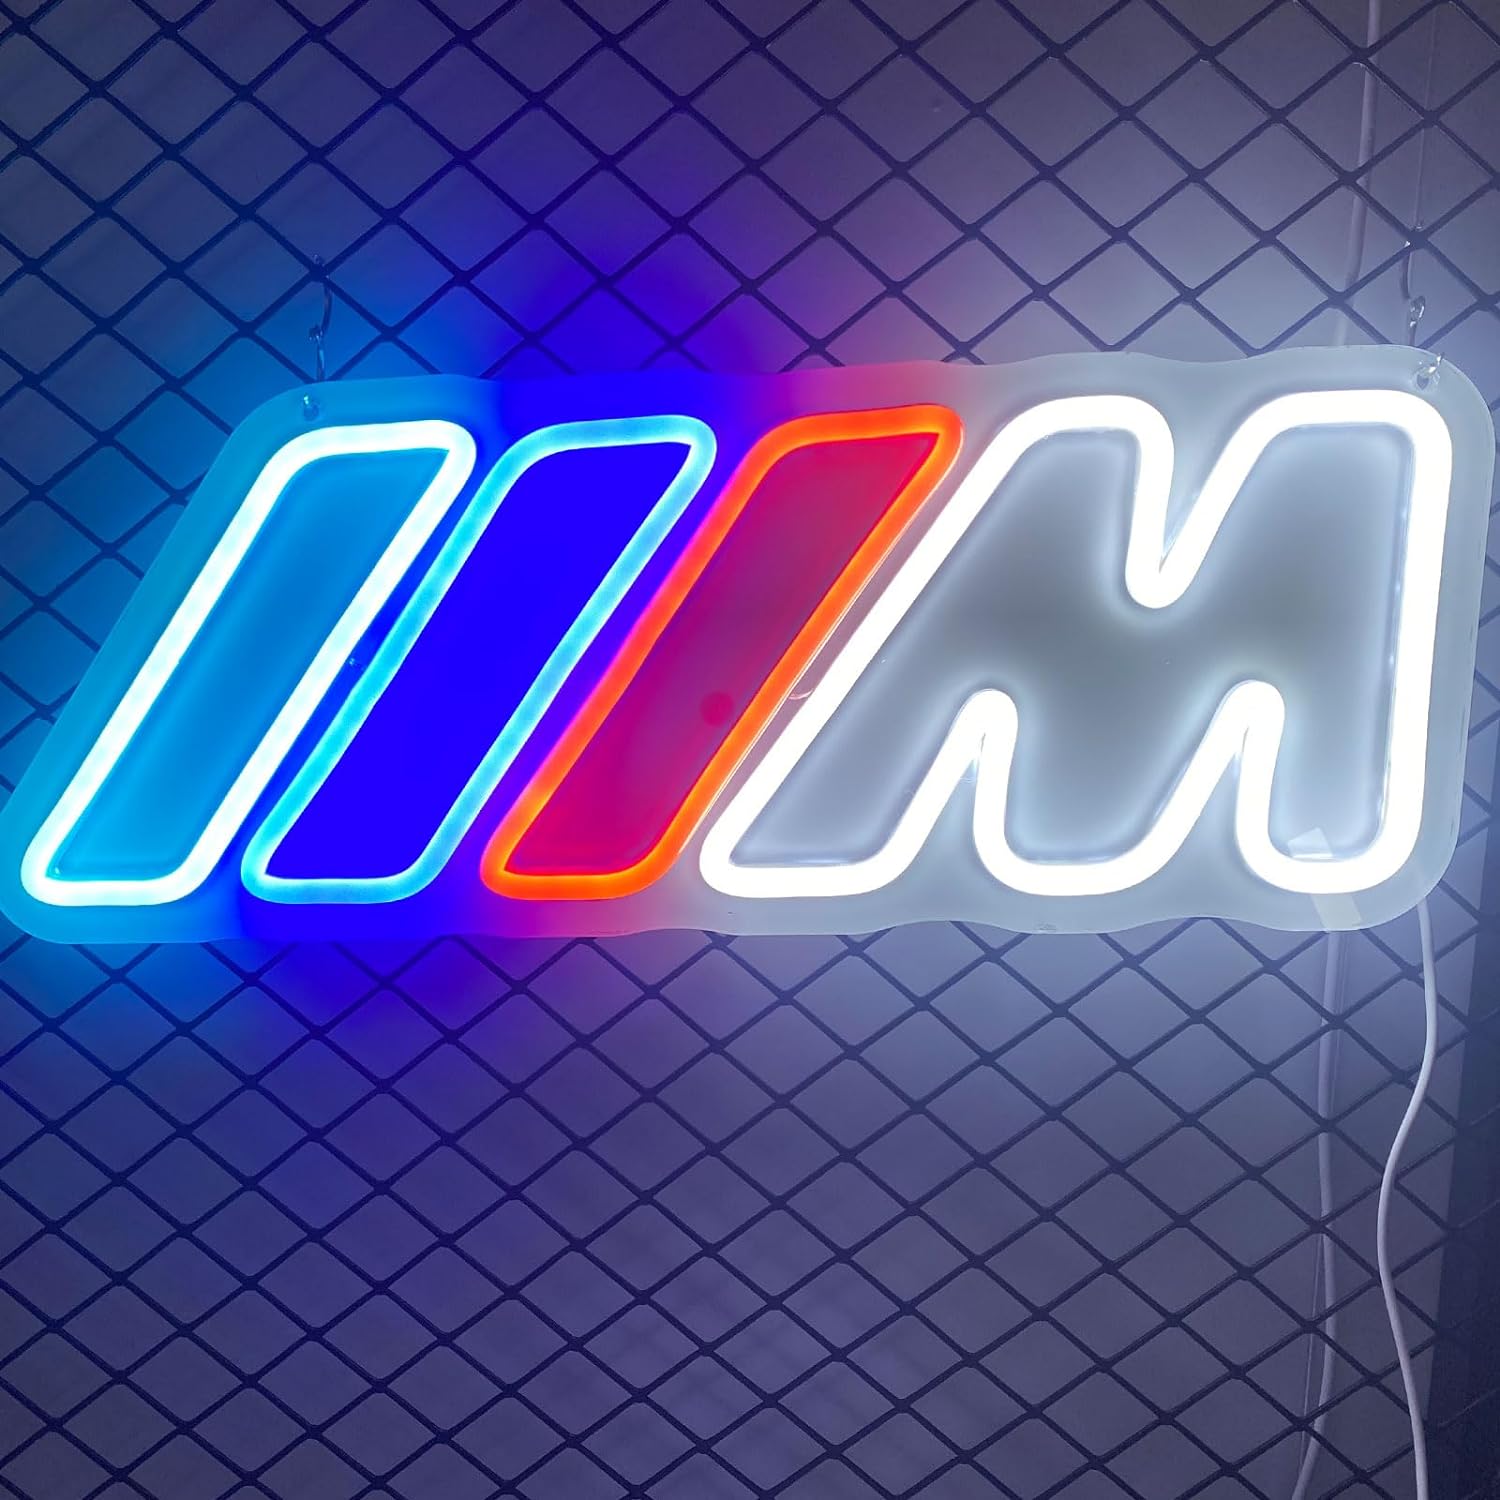 IIIM Car POWER Neon Sign - 16 x 6 Inches Auto Led Neon Night For Auto Shop,Man Cave